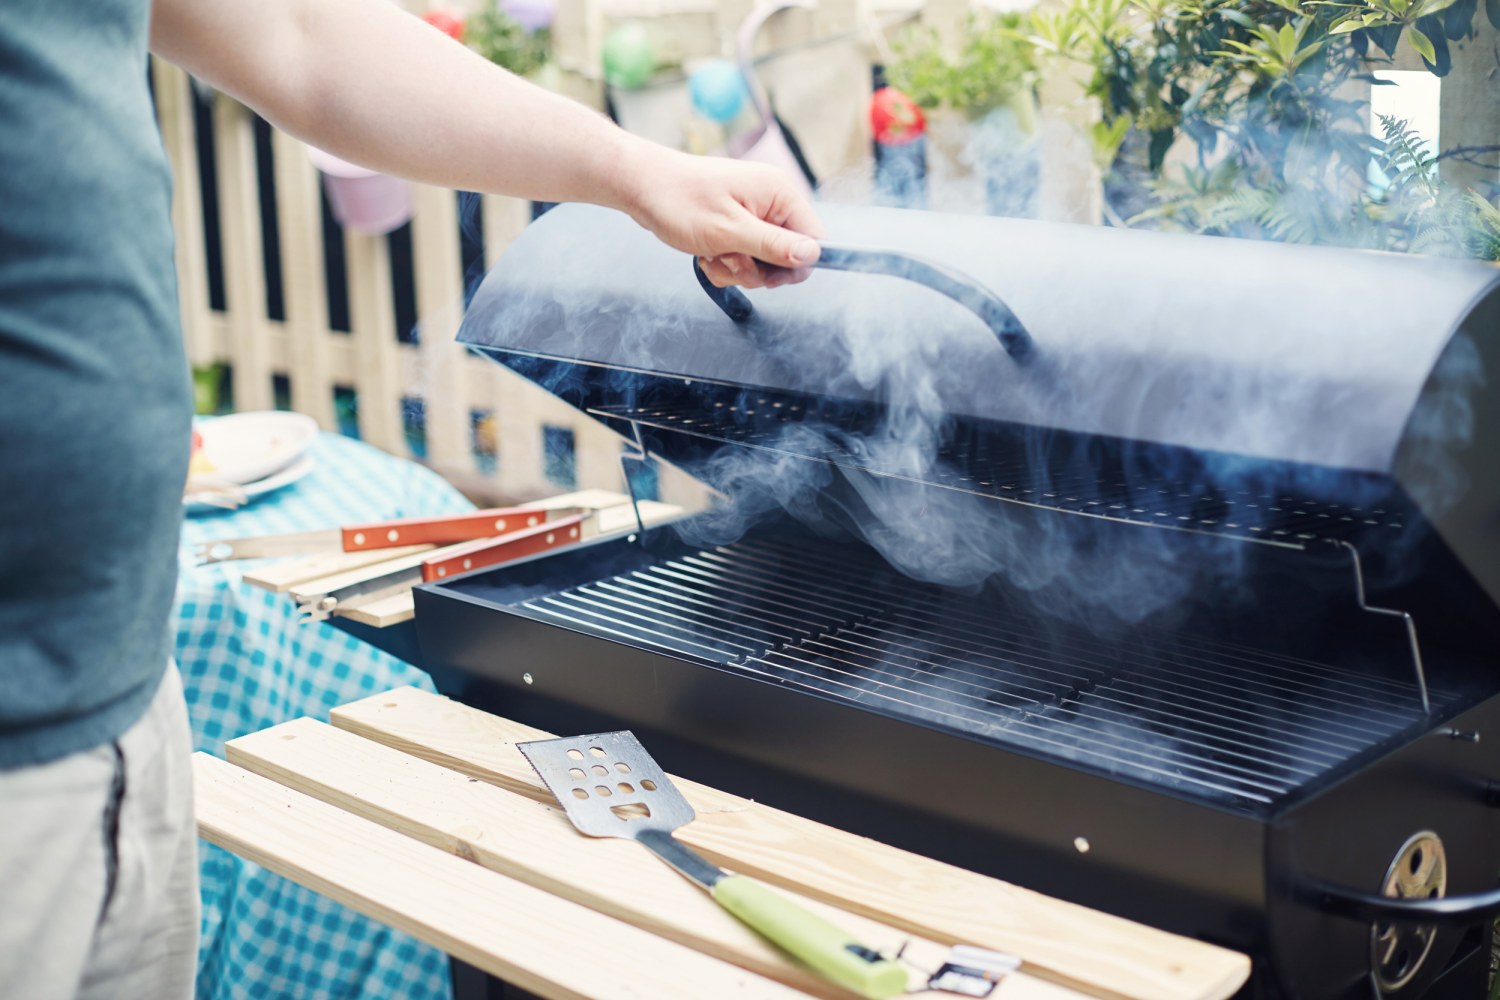 The Best Grill Brushes for Cleaning Your Grill Grates